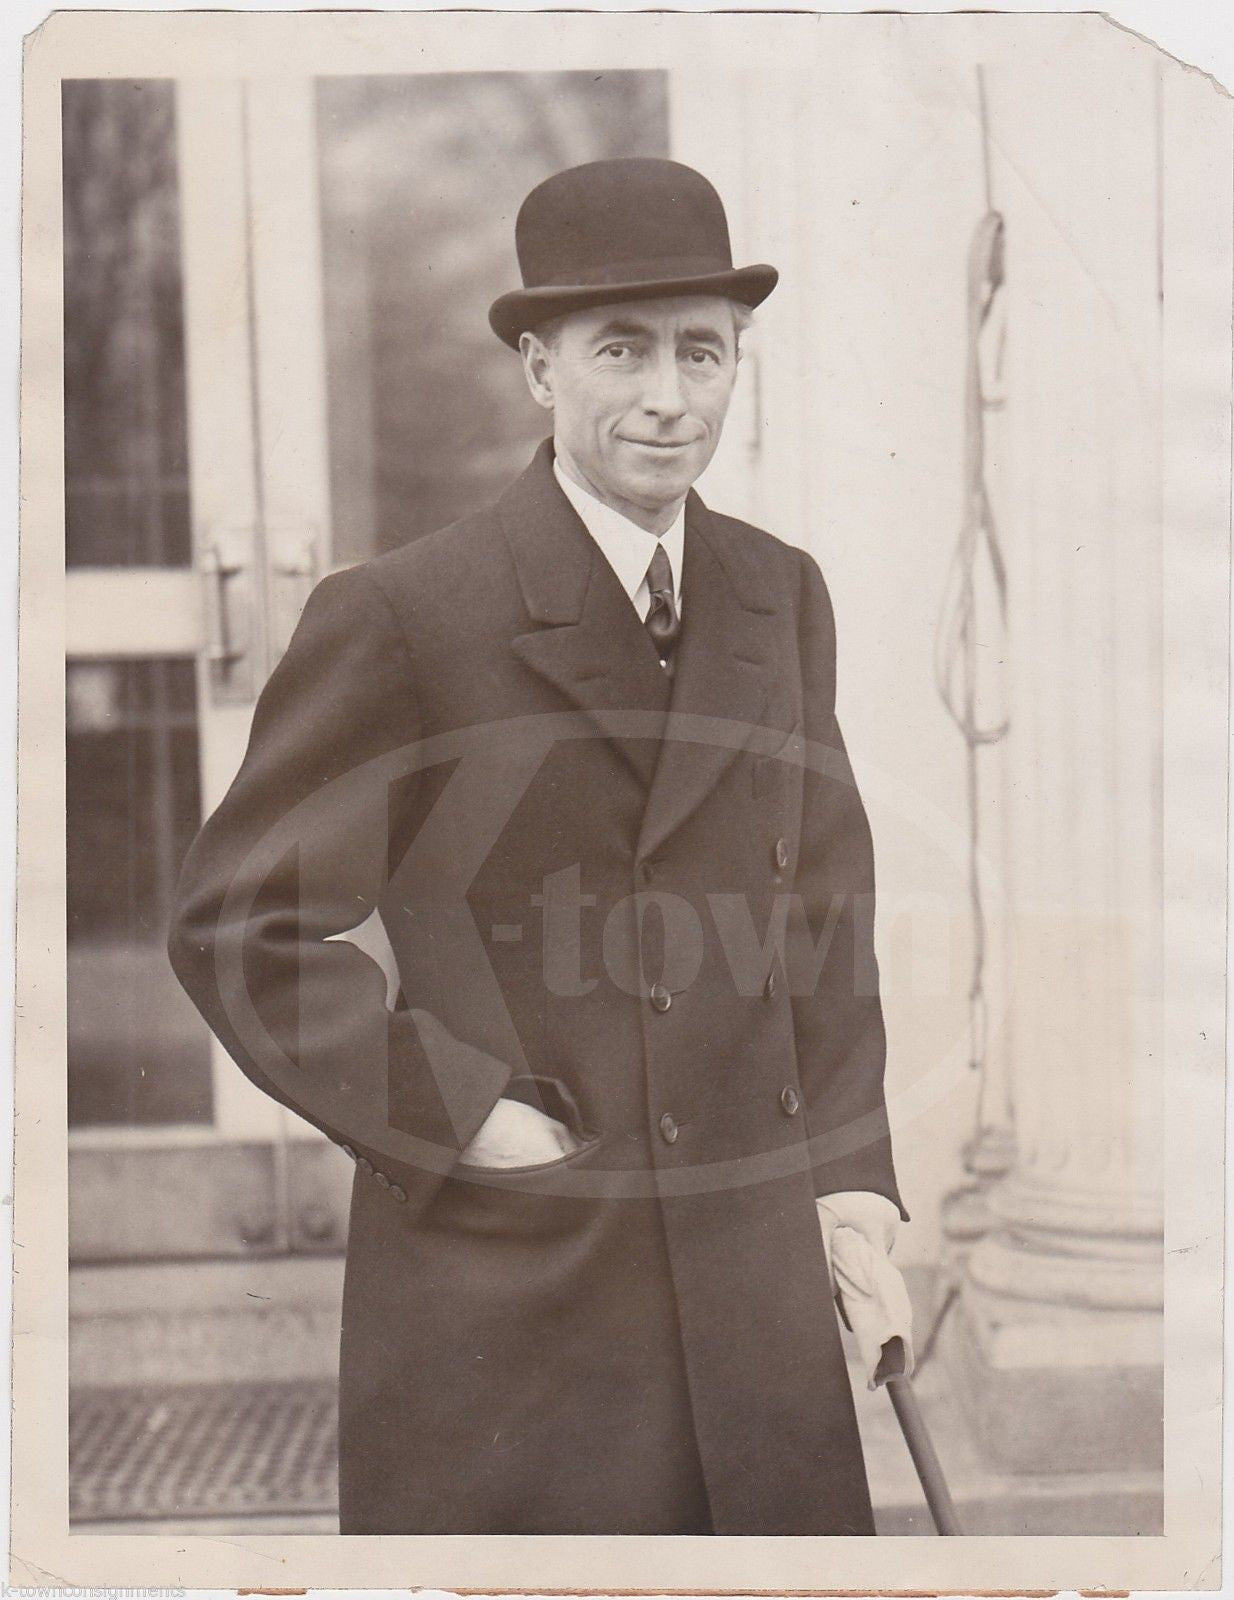 HUGH GIBSON FOREIGN MINISTER TO SWITZERLAND UNDER COOLIDGE NEWS PRESS PHOTO 1927 - K-townConsignments